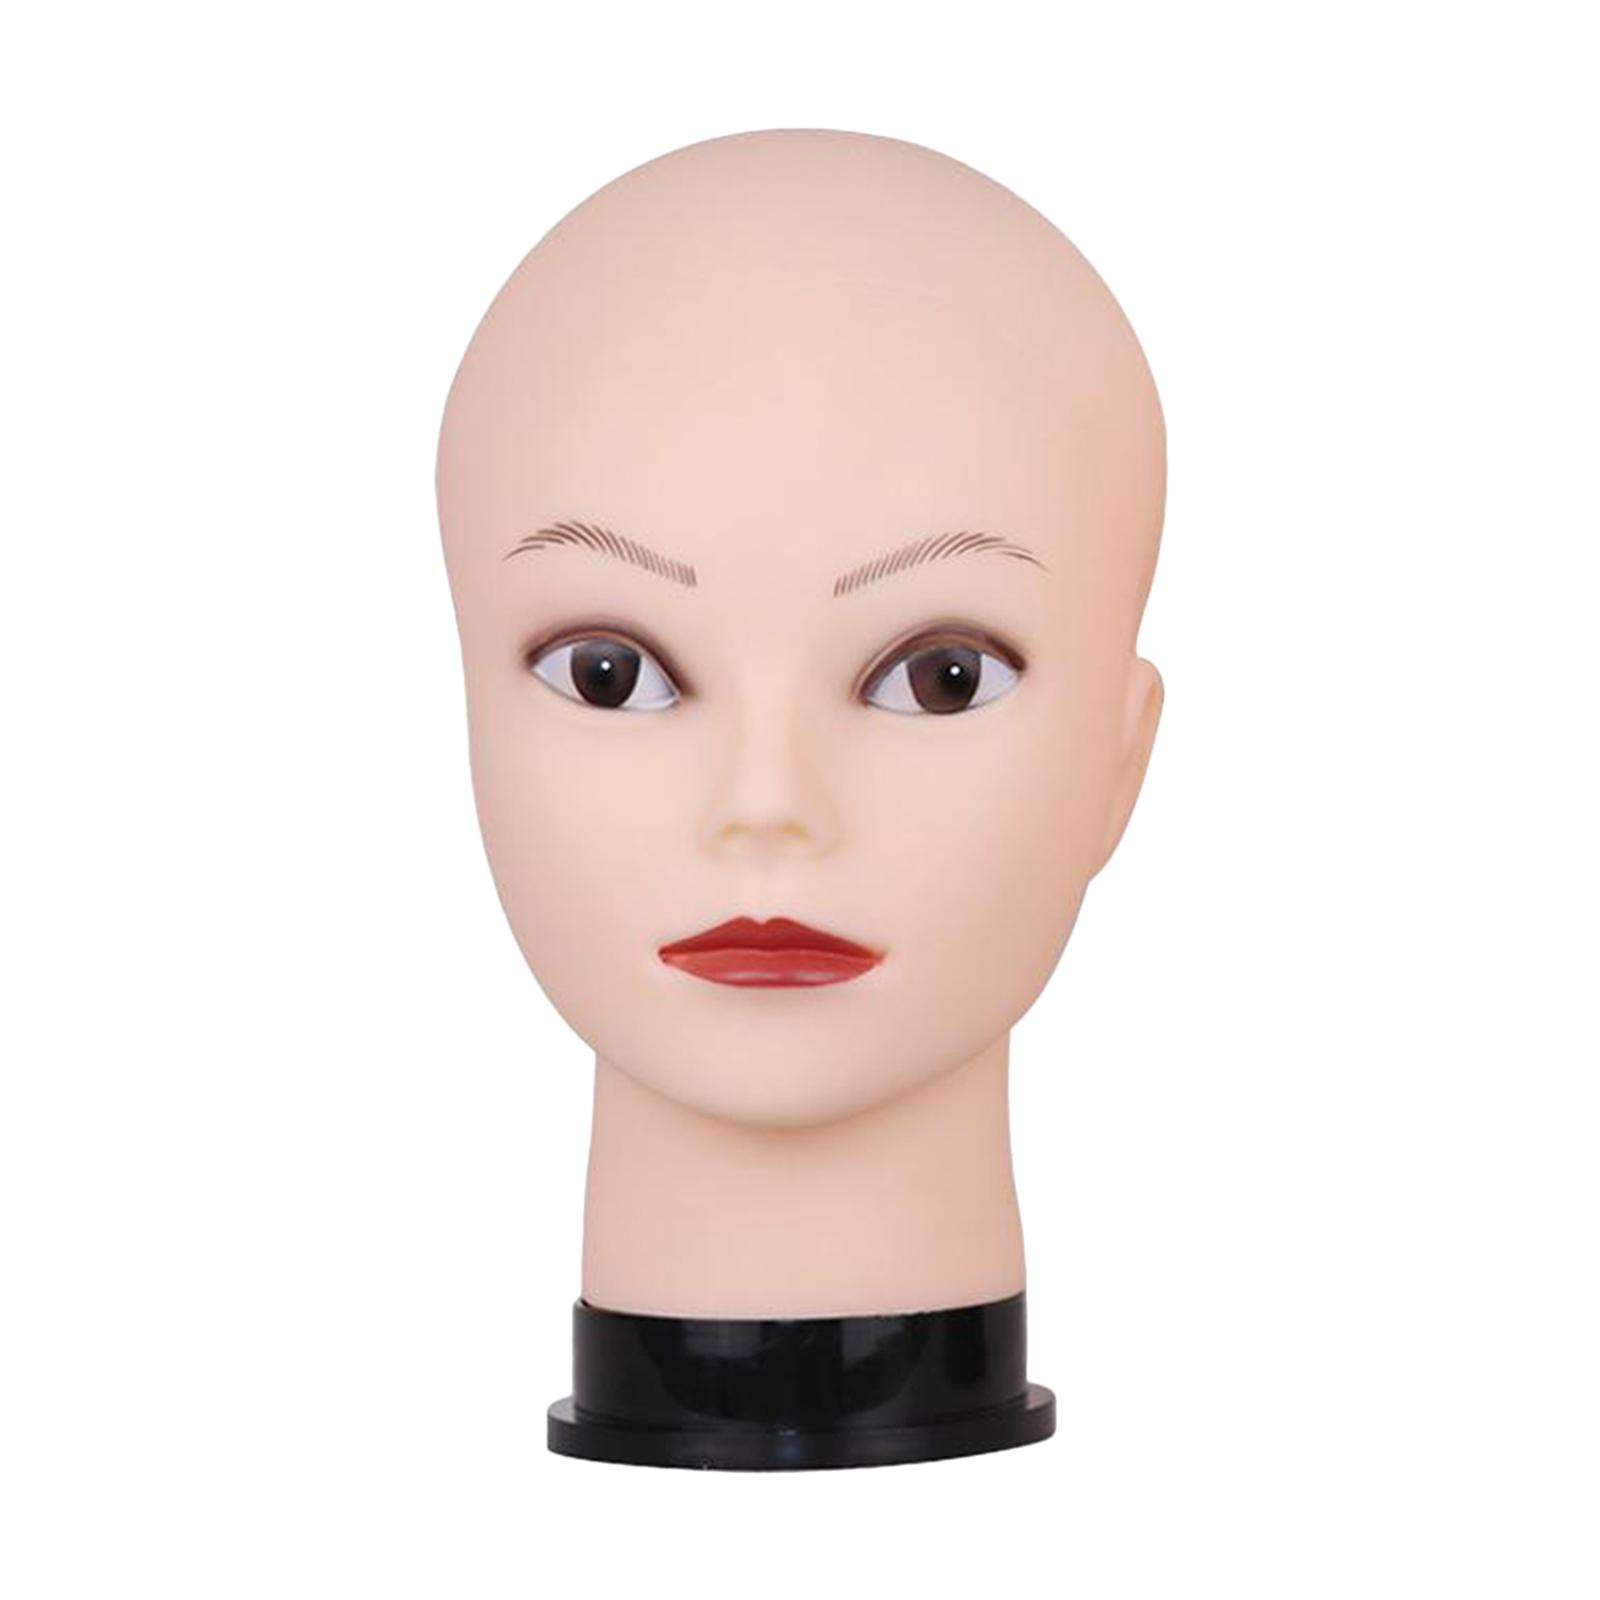 Mannequin Head Makeup Practice Cosmetology Mannequin Doll Face Head for Eyelashes Makeup Practice Display Hats Glasses with Holder White Makeup, Size